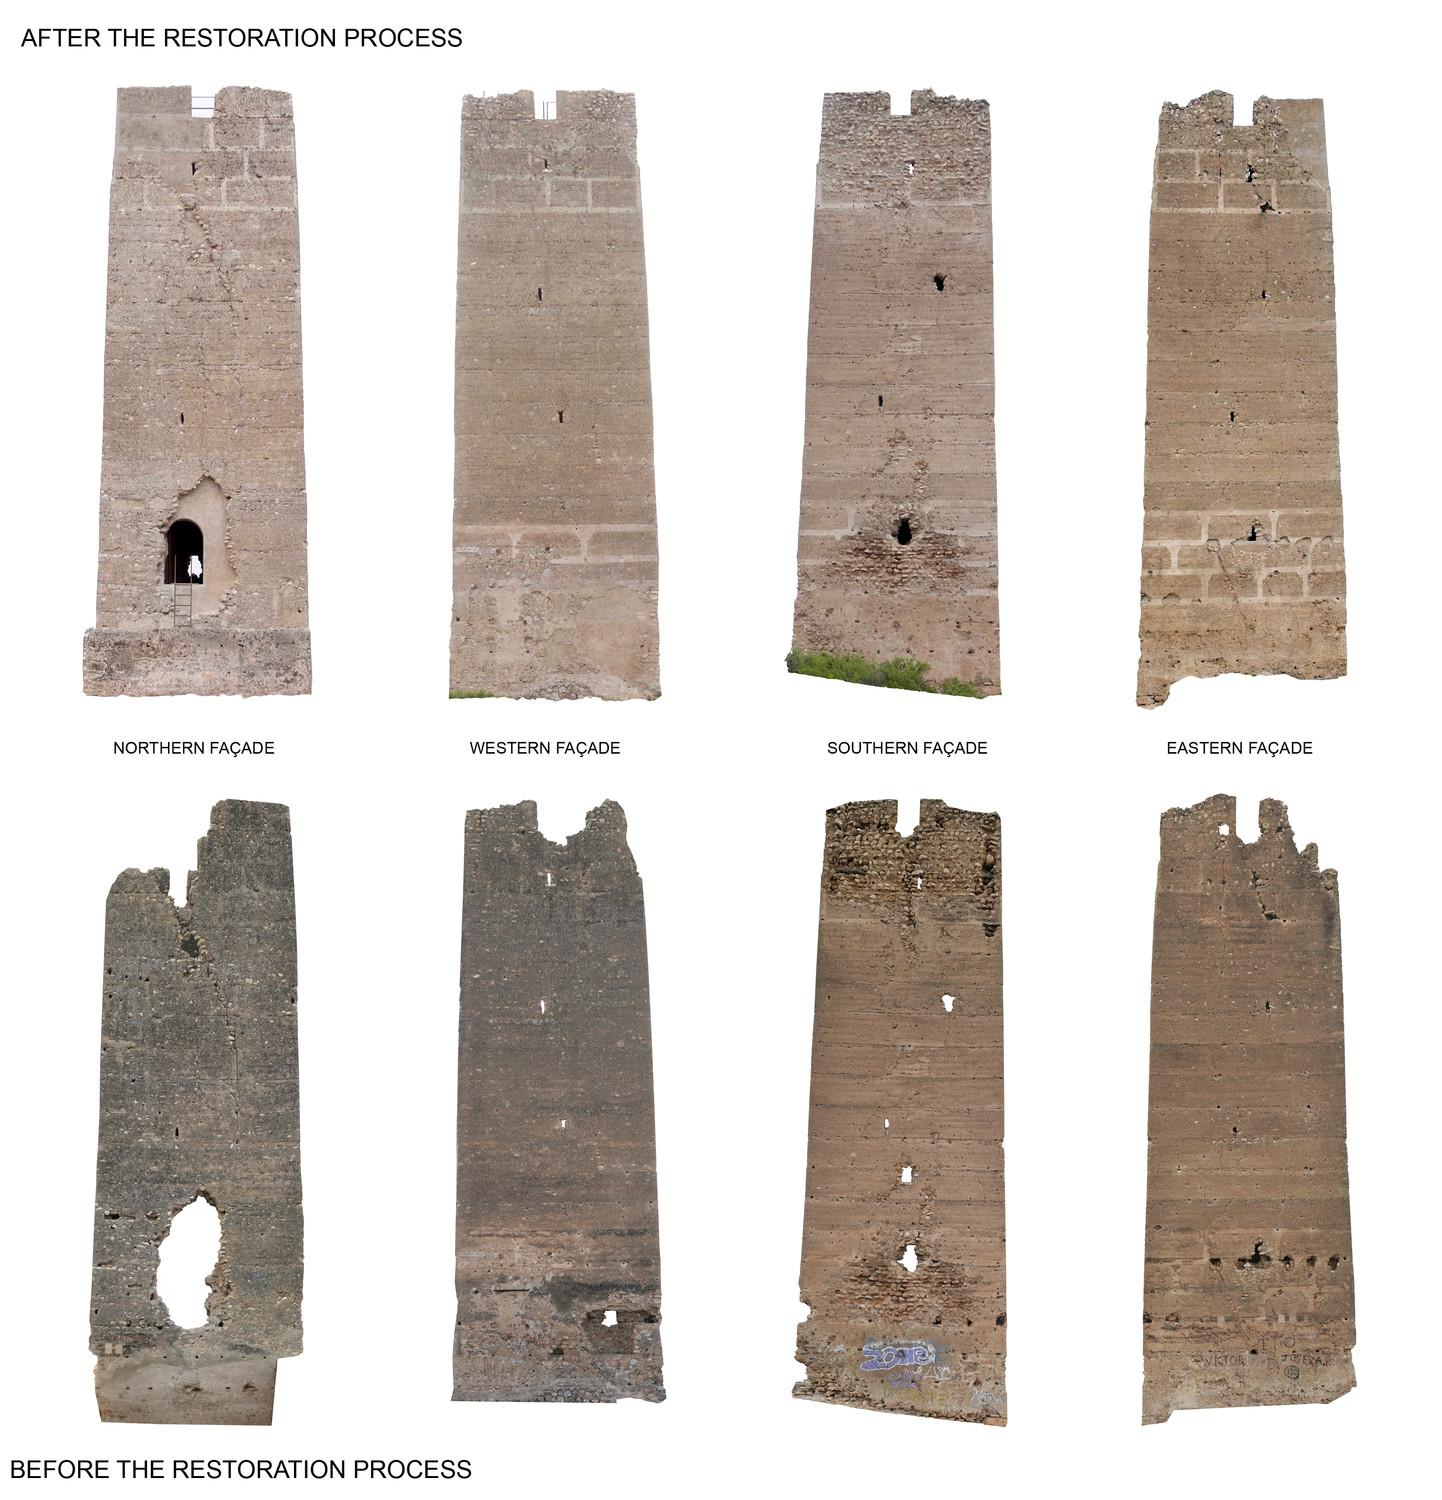 Comparison of all the façades of the tower before and after the restoration